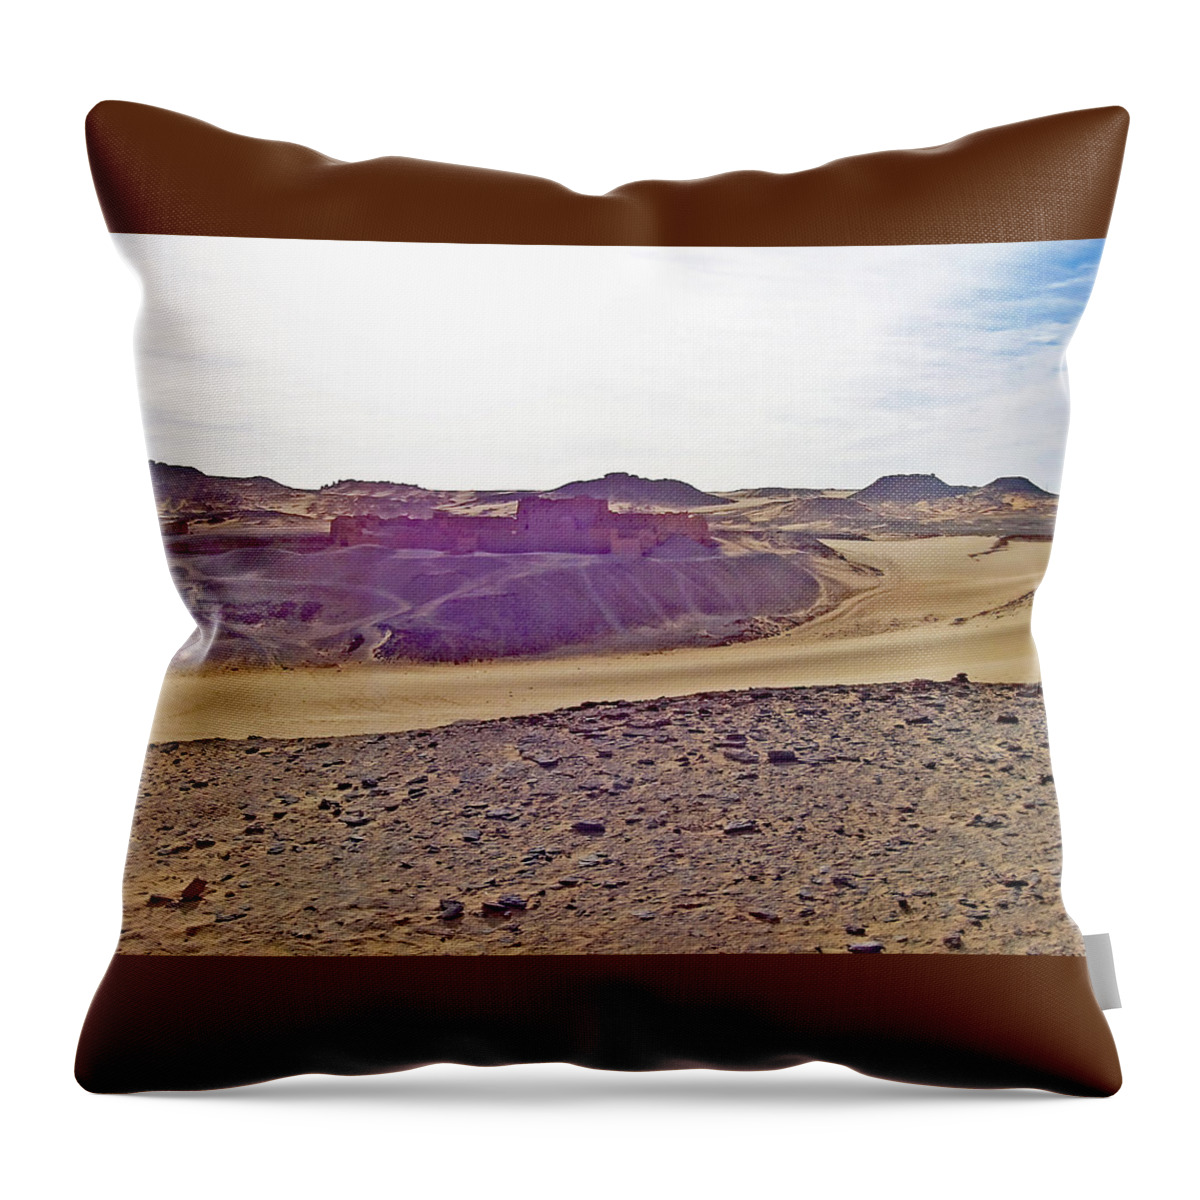 St. Simeon Throw Pillow featuring the photograph St. Simeon by Debbie Oppermann